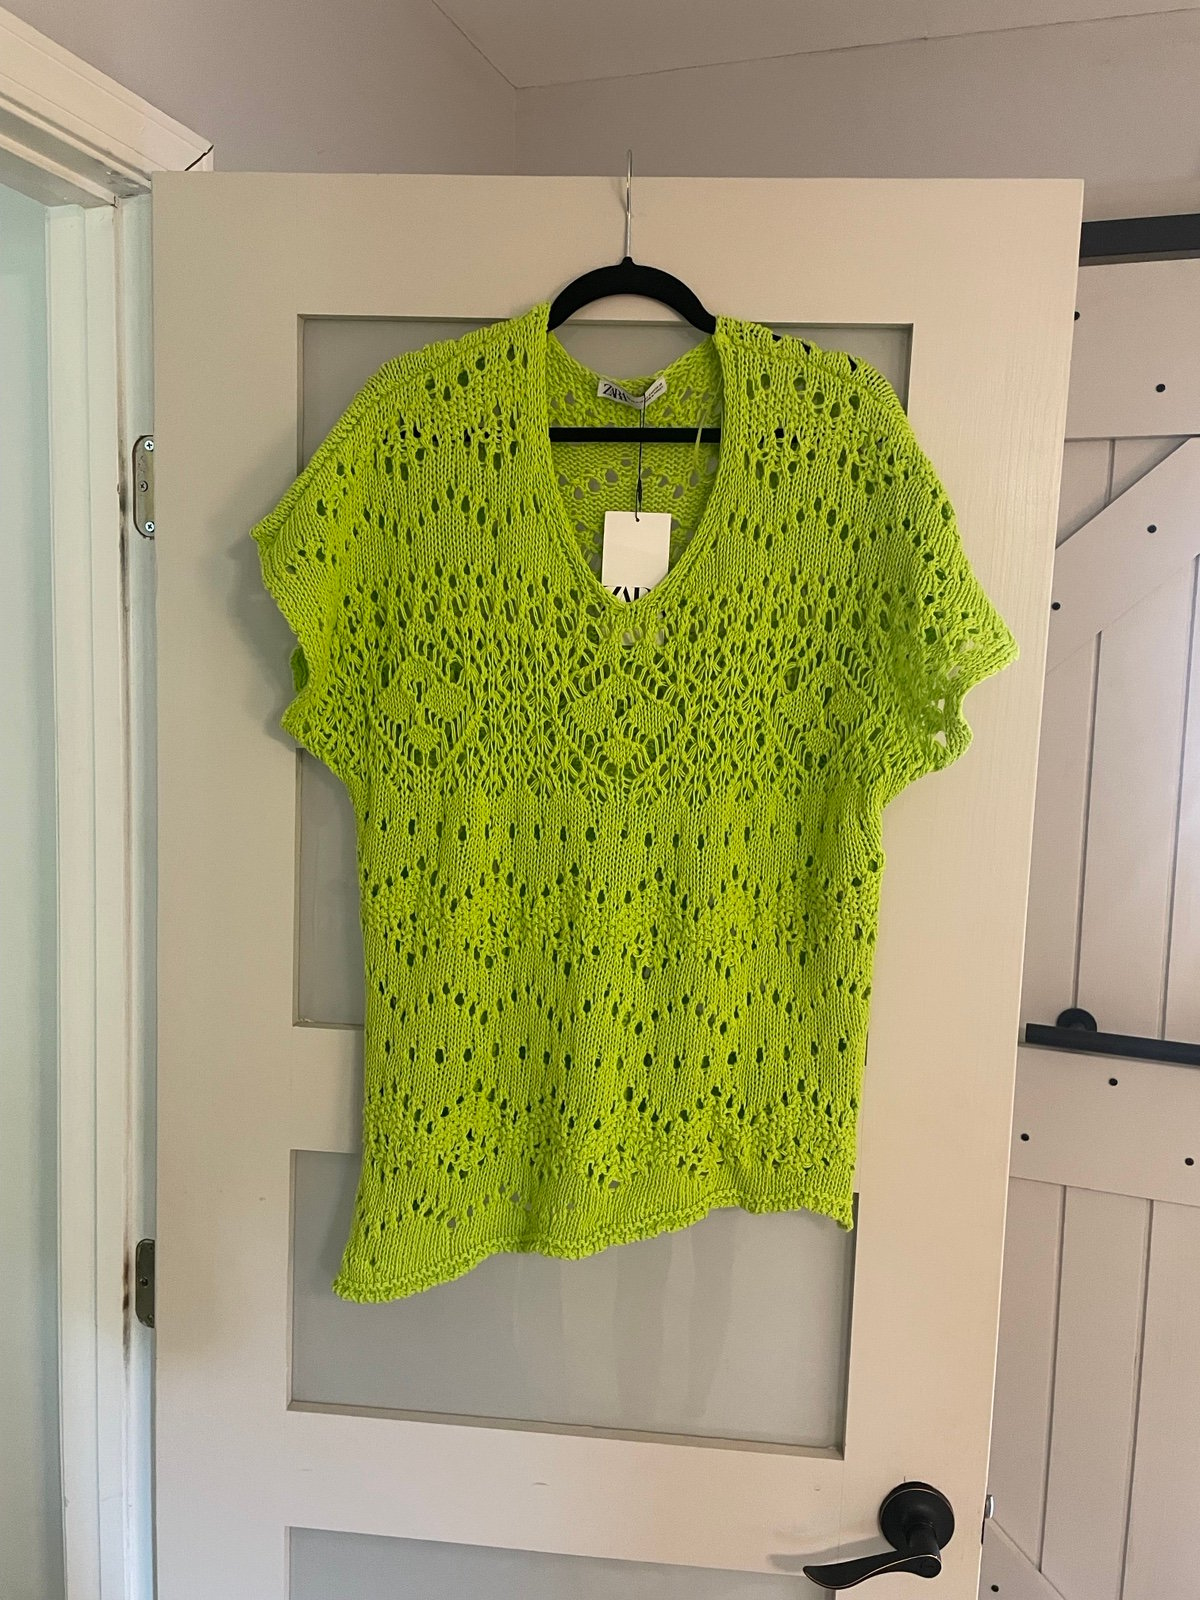 Exclusive Zara Lime Green Crocheted Top NWT Xs Small hBzY0j81E Hot Sale